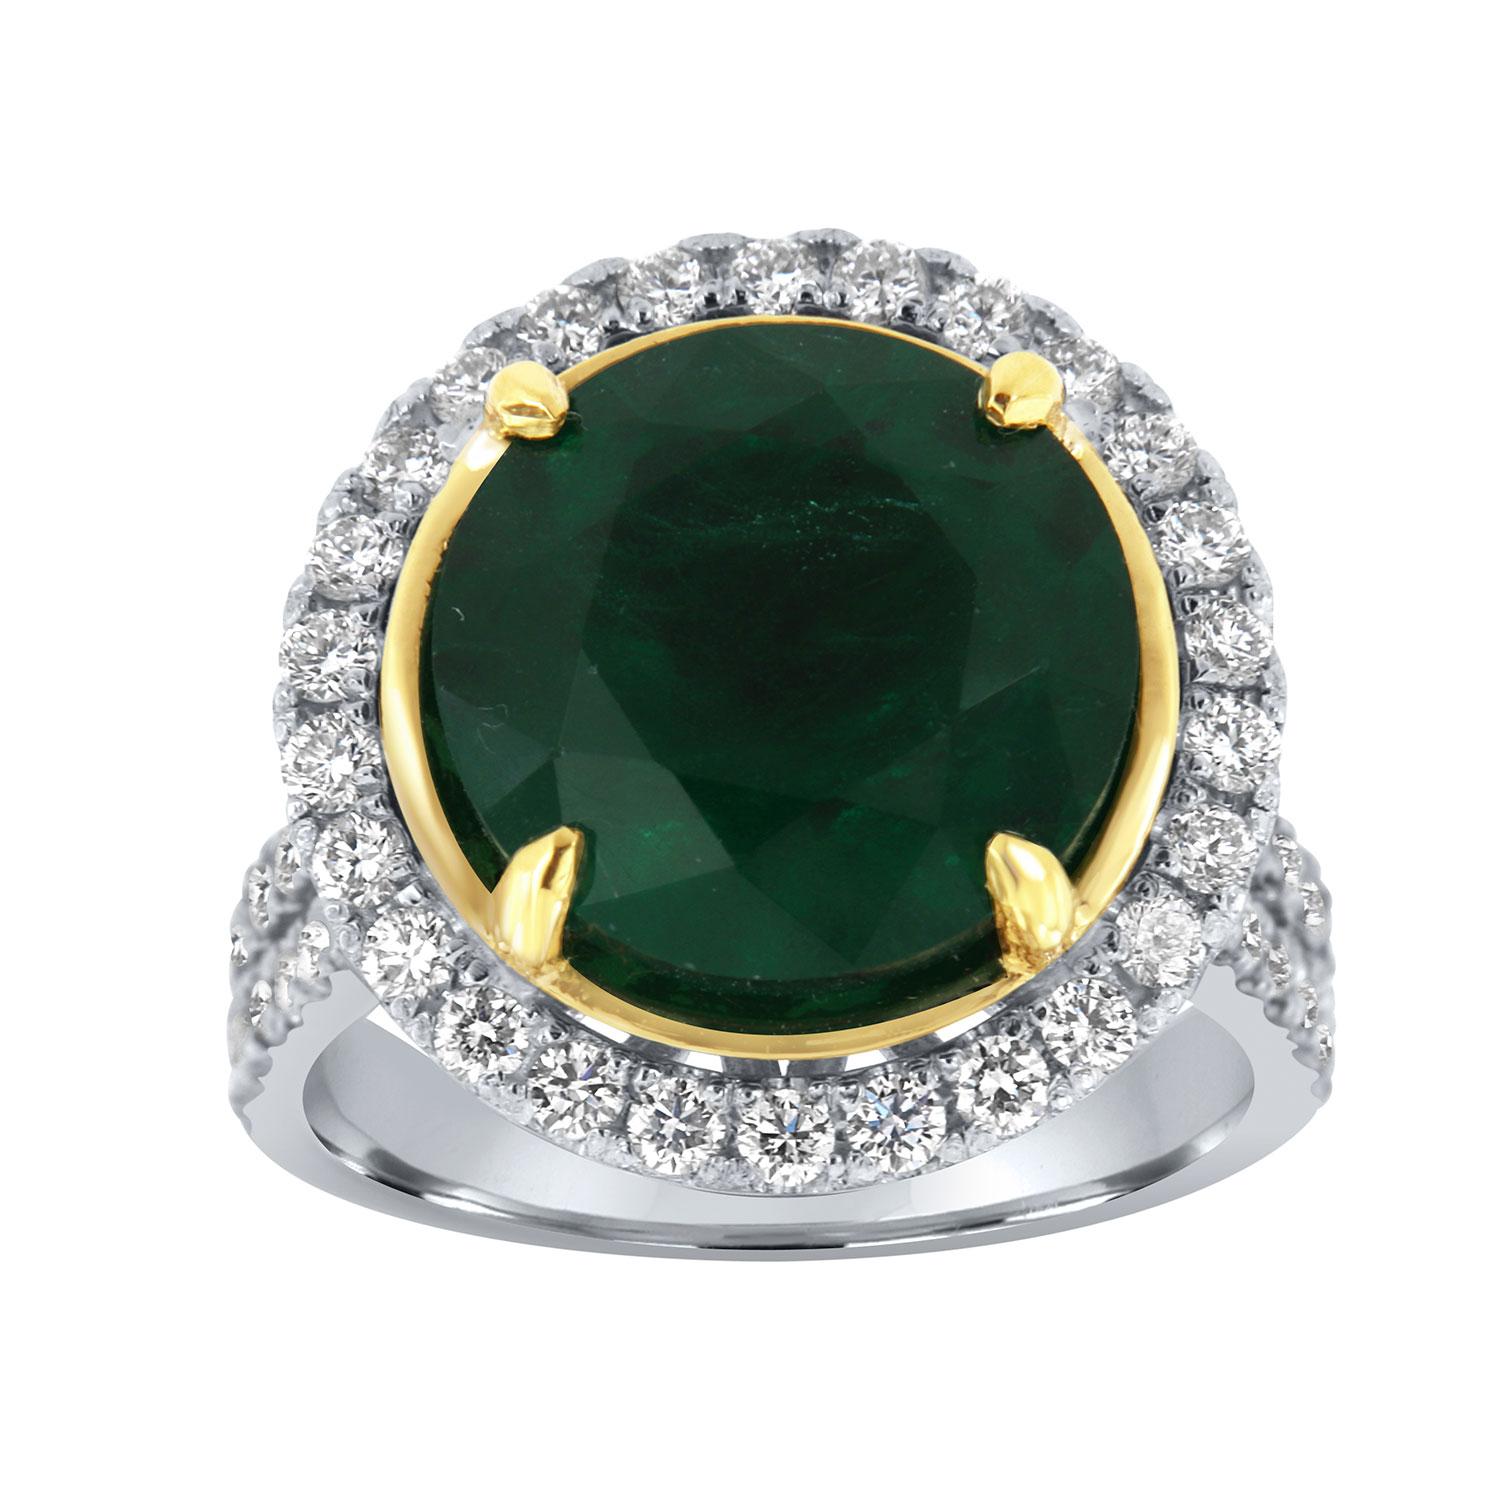 This Platinum & 18K Yellow gold ring features a RARE 7.77 Carat Round cut Natural Green emerald from Zambia. Excellent, bright, vibrant green color. The emerald is encircled by a halo of brilliant round diamonds on a 4.00 mm wide split shank band.